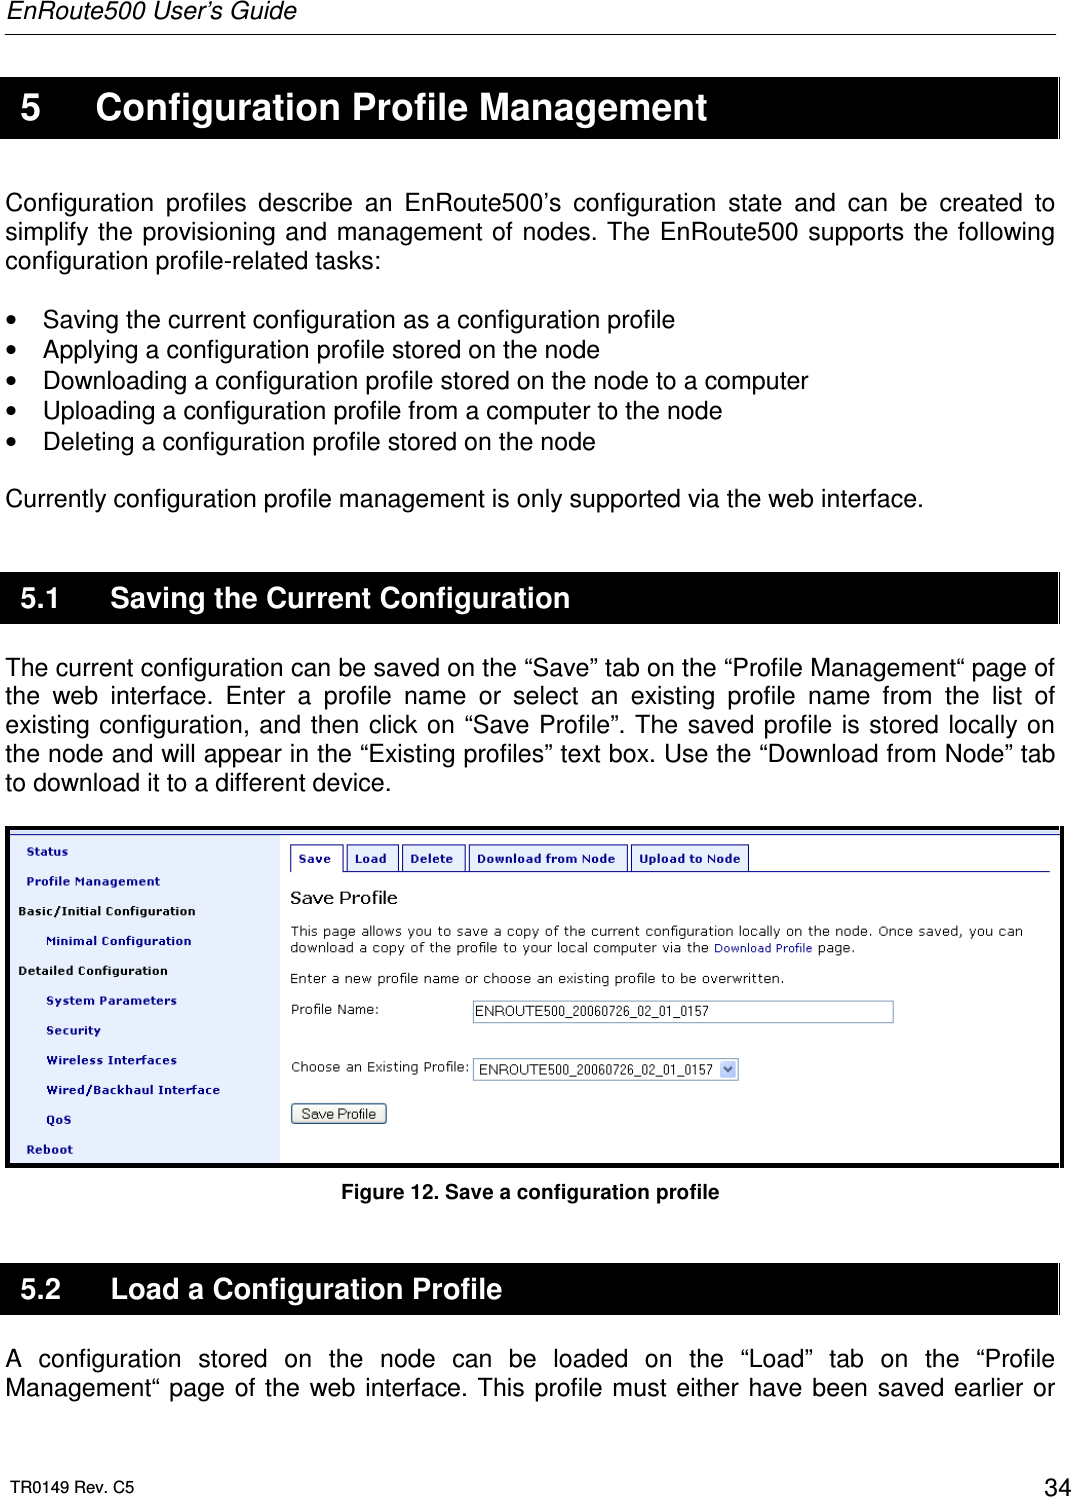 EnRoute500 User’s Guide  TR0149 Rev. C5  34  5  Configuration Profile Management Configuration  profiles  describe  an  EnRoute500’s  configuration  state  and  can  be  created  to simplify the provisioning and management of nodes. The EnRoute500 supports the following configuration profile-related tasks:  •  Saving the current configuration as a configuration profile •  Applying a configuration profile stored on the node •  Downloading a configuration profile stored on the node to a computer •  Uploading a configuration profile from a computer to the node •  Deleting a configuration profile stored on the node  Currently configuration profile management is only supported via the web interface.  5.1  Saving the Current Configuration The current configuration can be saved on the “Save” tab on the “Profile Management“ page of the  web  interface.  Enter  a  profile  name  or  select  an  existing  profile  name  from  the  list  of existing configuration, and then  click on  “Save Profile”. The saved profile is stored locally on the node and will appear in the “Existing profiles” text box. Use the “Download from Node” tab to download it to a different device.   Figure 12. Save a configuration profile 5.2  Load a Configuration Profile A  configuration  stored  on  the  node  can  be  loaded  on  the  “Load”  tab  on  the  “Profile Management“ page  of the web  interface. This profile must either  have been saved earlier or 